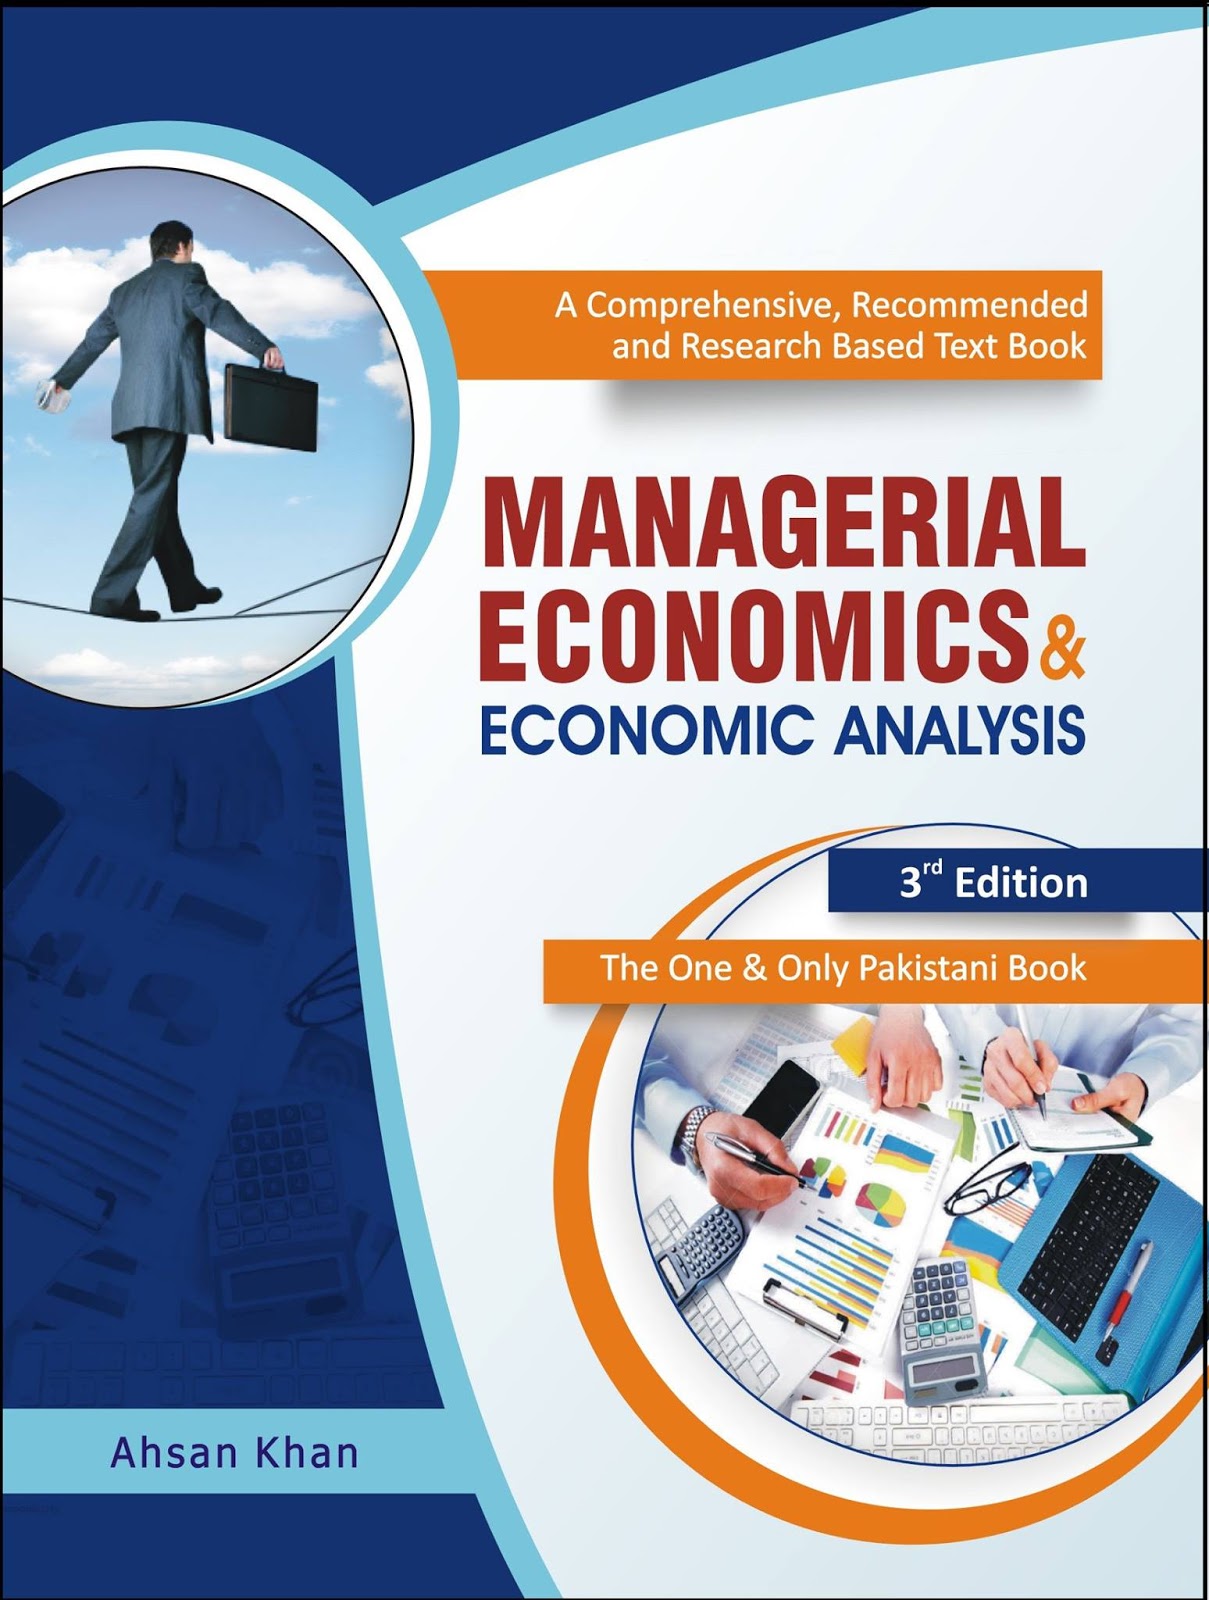 the nature and scope of managerial economics